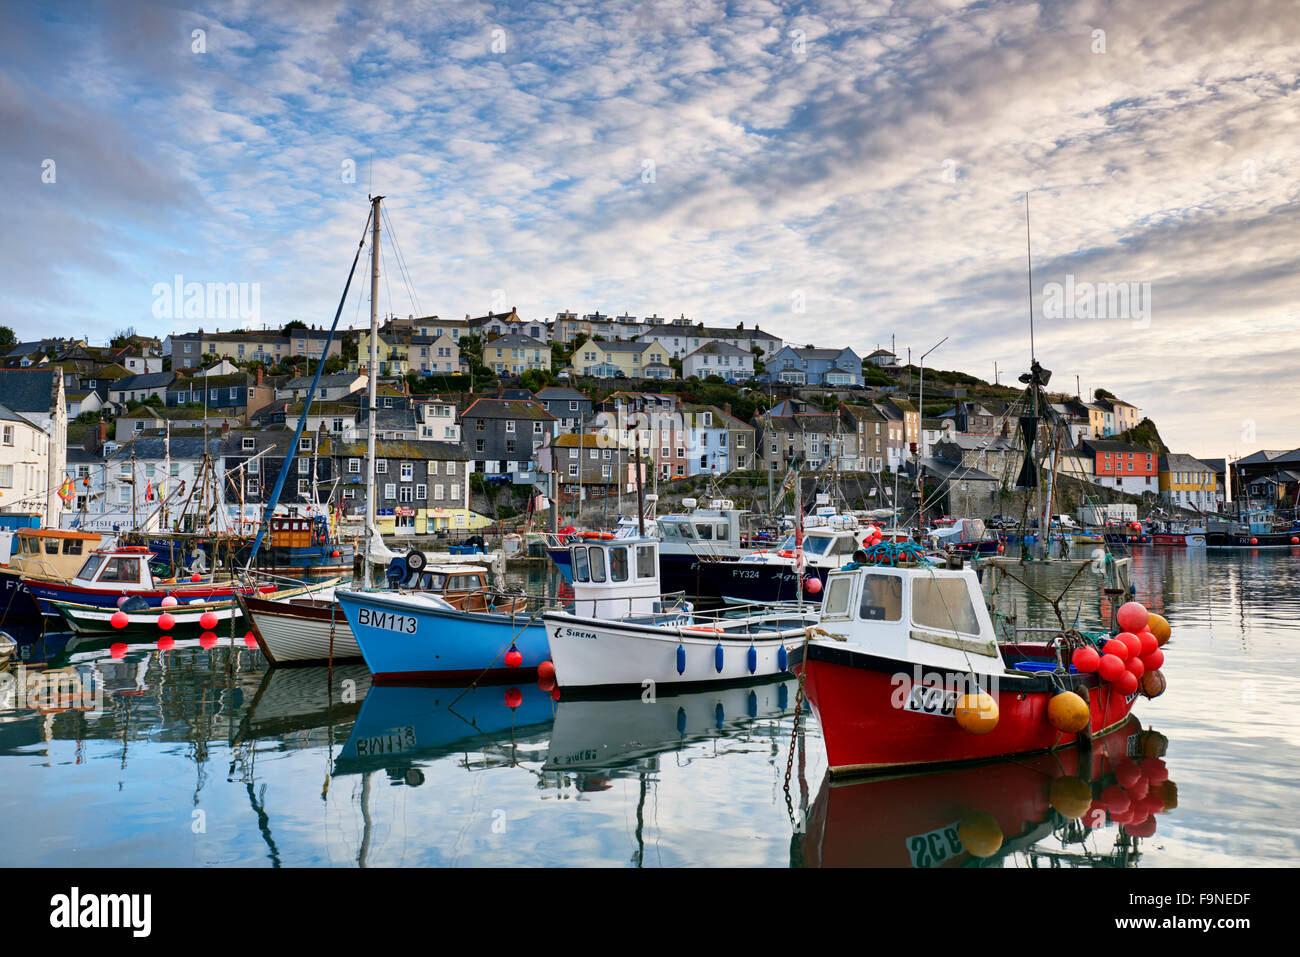 Mevagissey waterfront. Banque D'Images